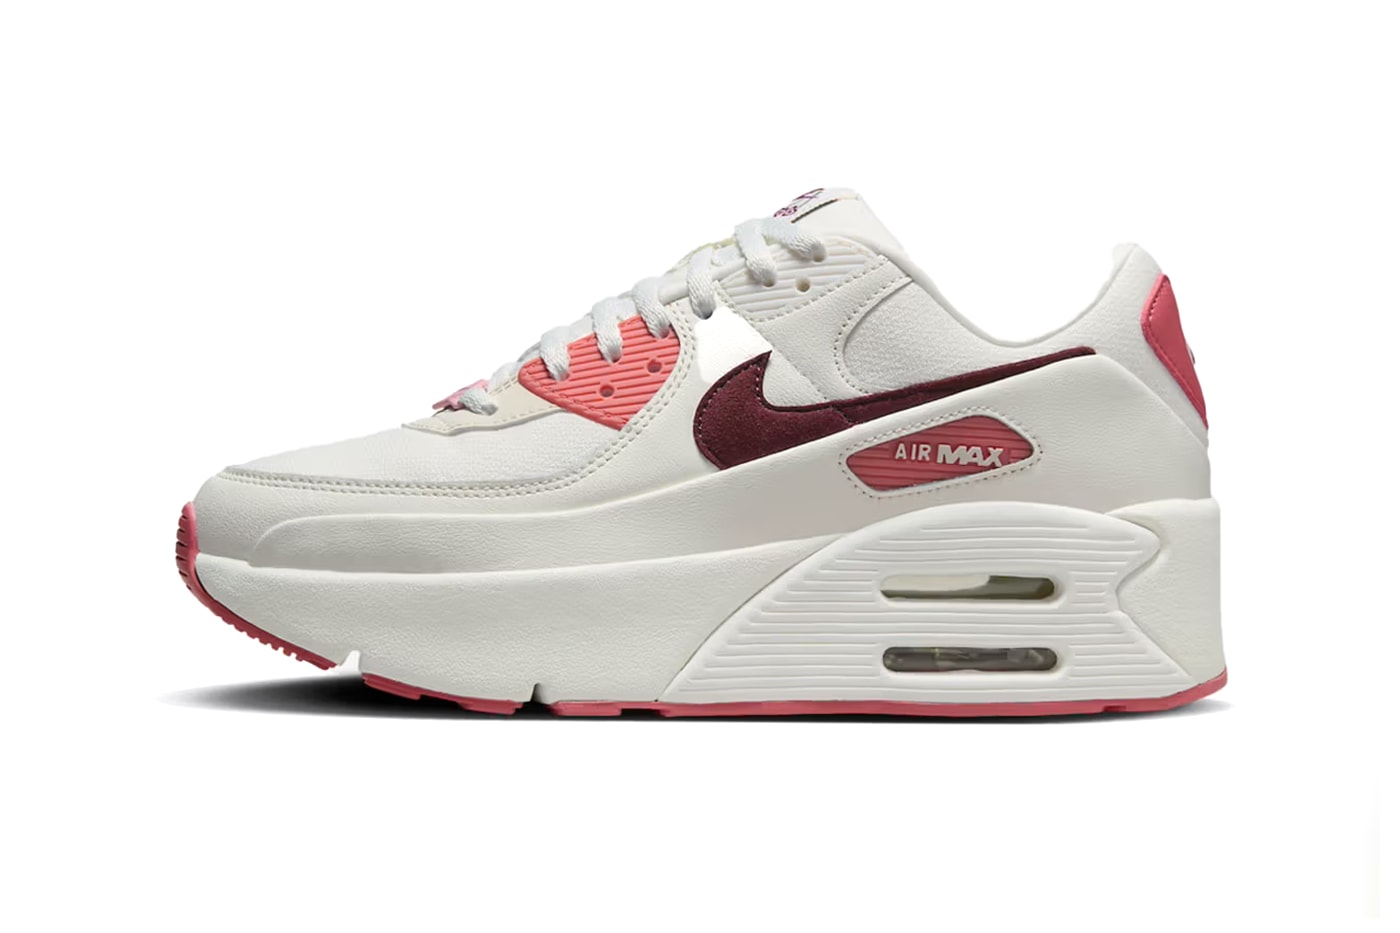 Nike Reveals Air Max 90 LV8 “Valentine's Day”